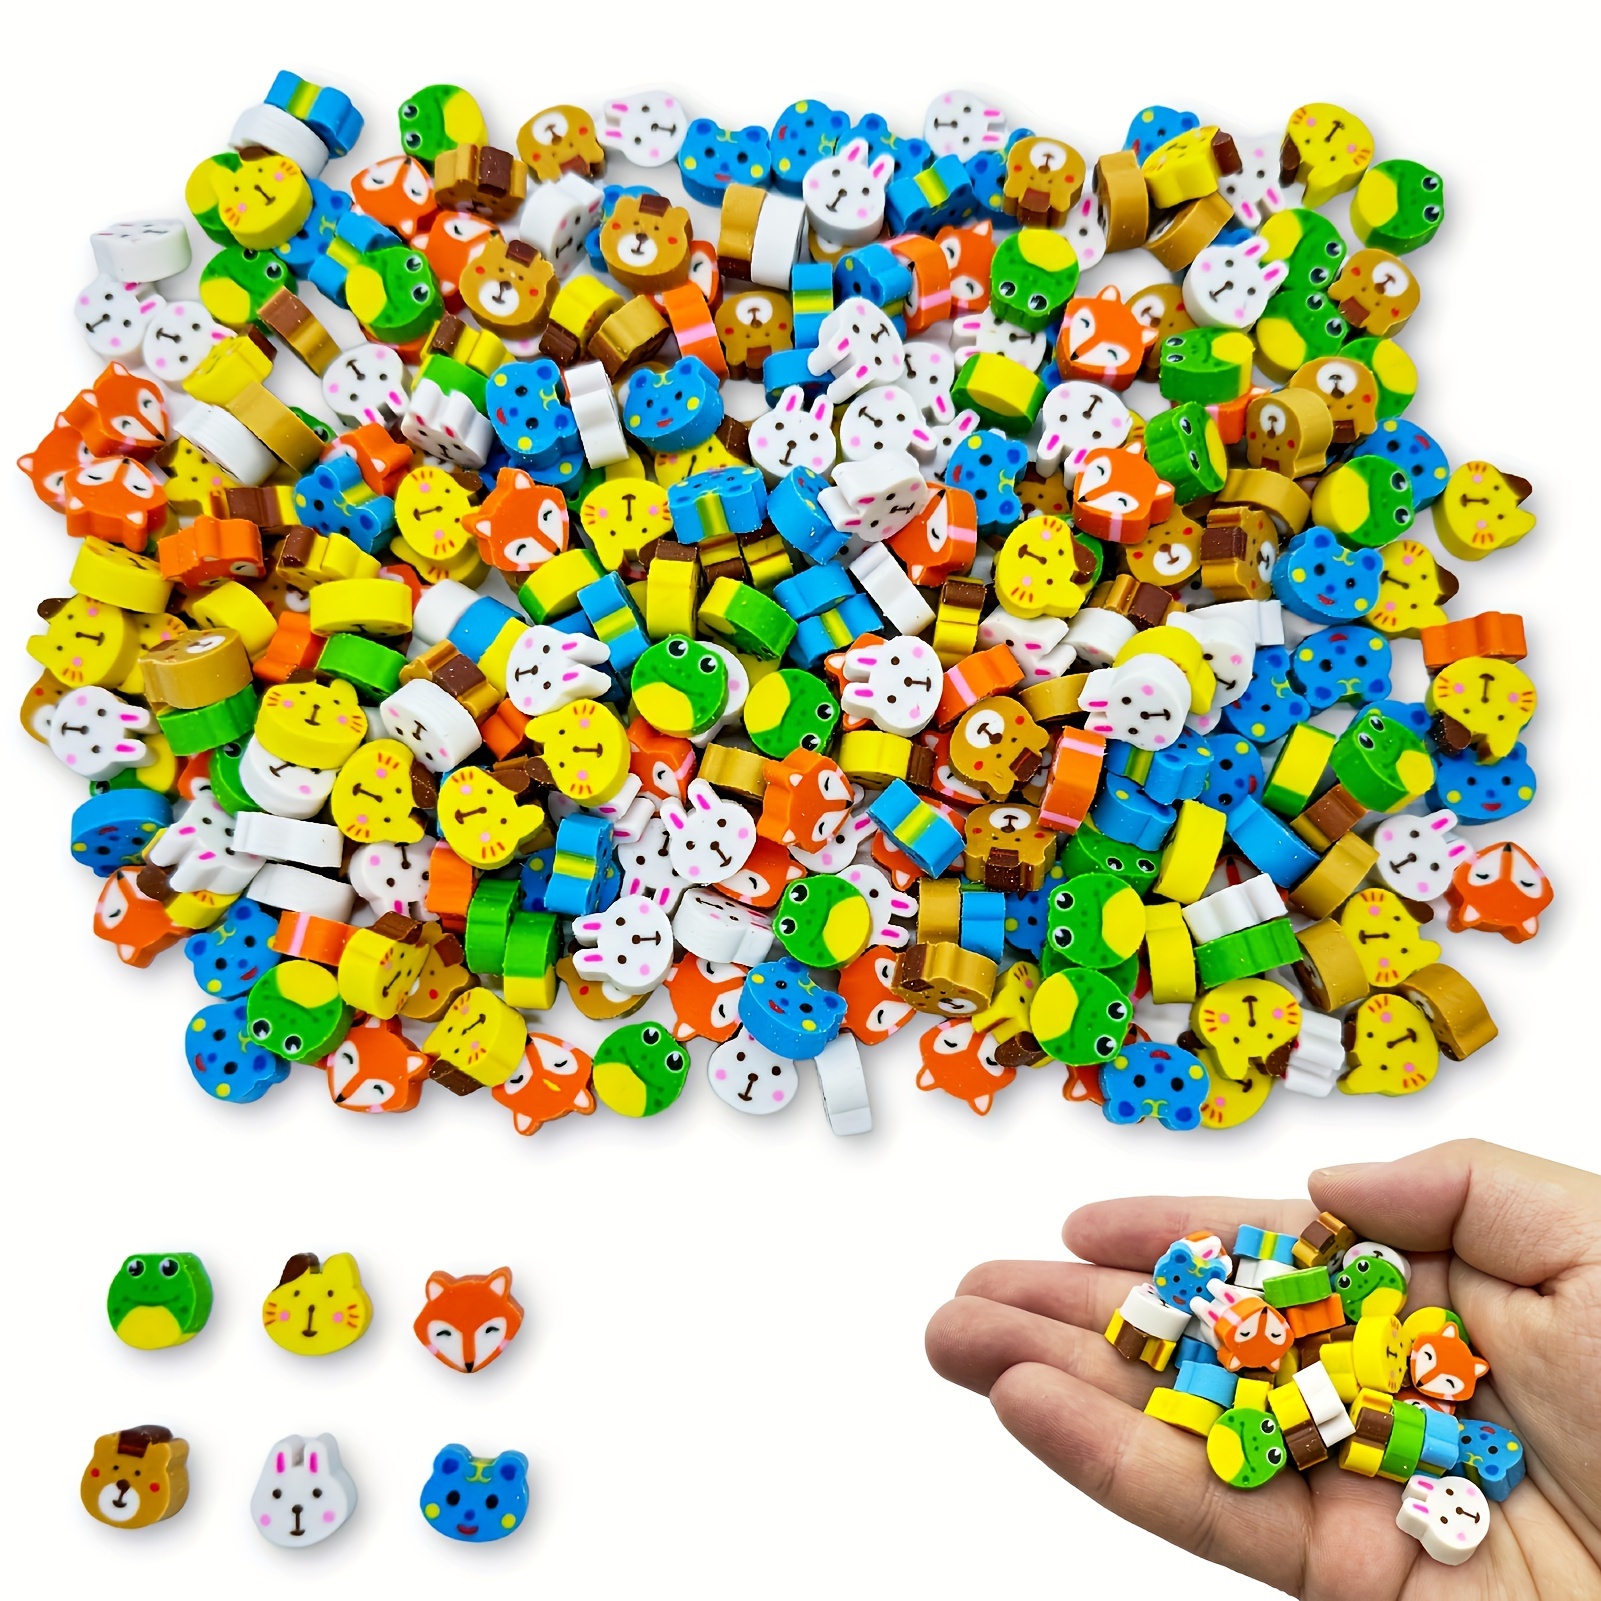 

100-piece Miniature Erasers - Variety Of Adorable Bunny & Unique Designs, Ideal For School And Office Accessories Small Erasers For Young Ones In Bulk